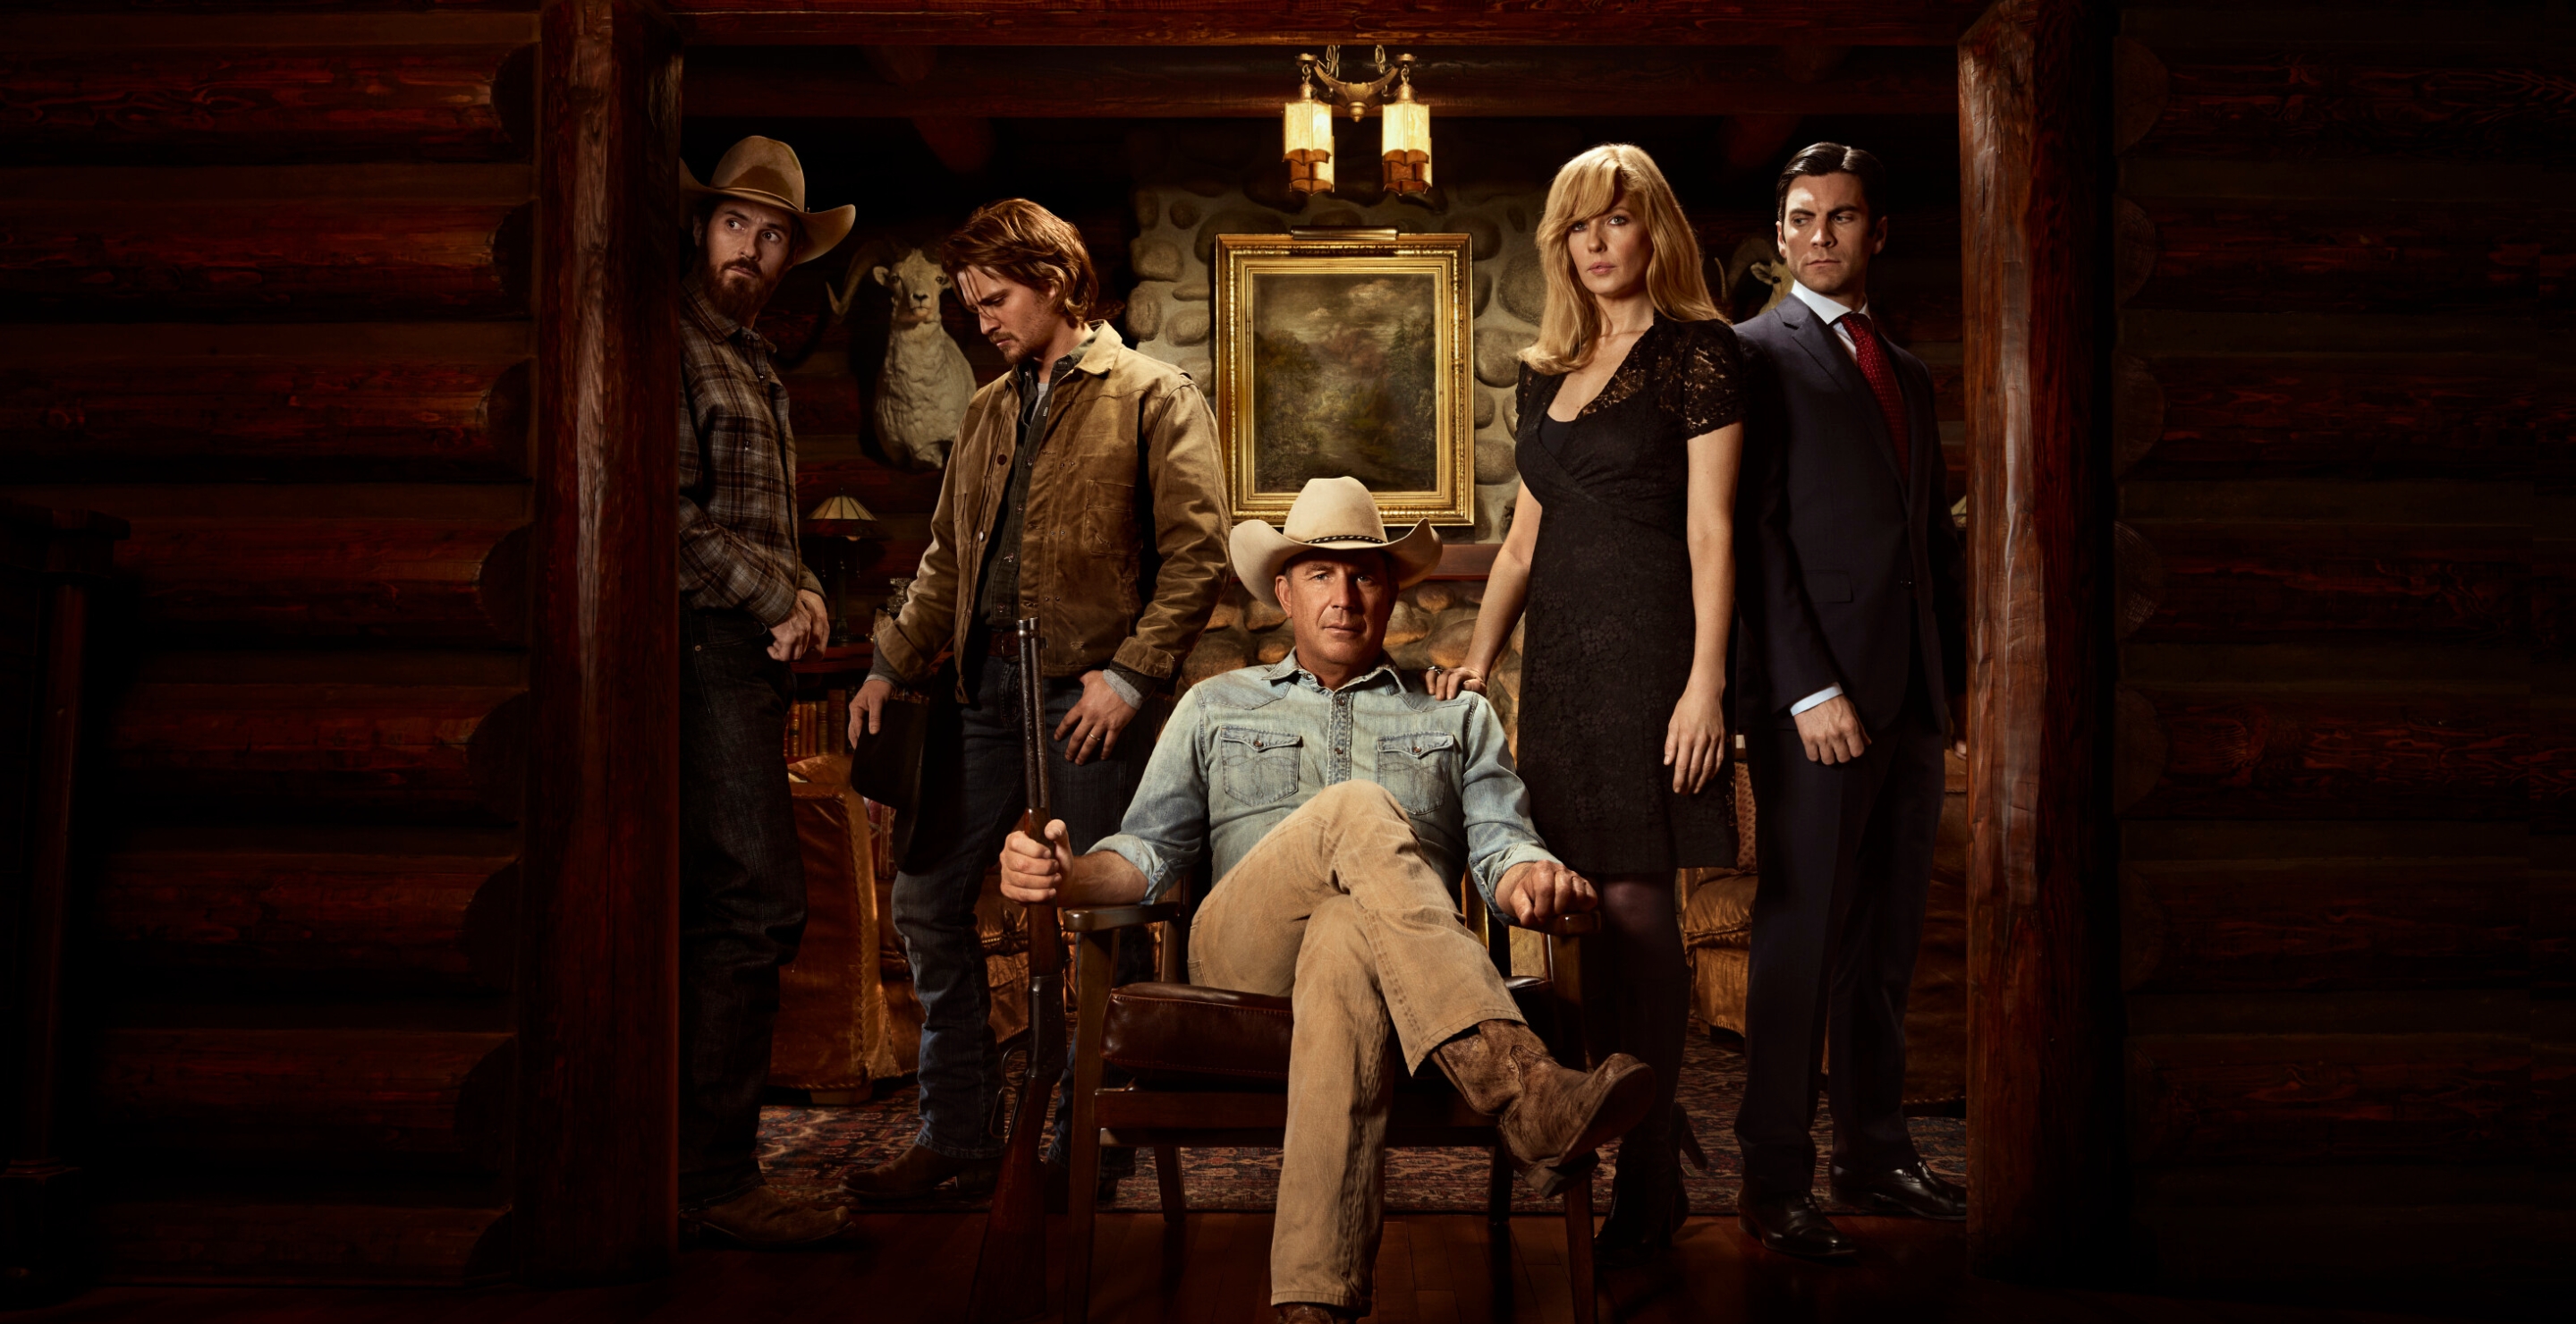 Cole Hauser as Rip Wheeler, Luke Grimes as Kayce Dutton, Kevin Costner as John Dutton, Kelly Reilly as Beth Dutton, Wes Bentley as Jamie Dutton in the Yellowstone series premiere